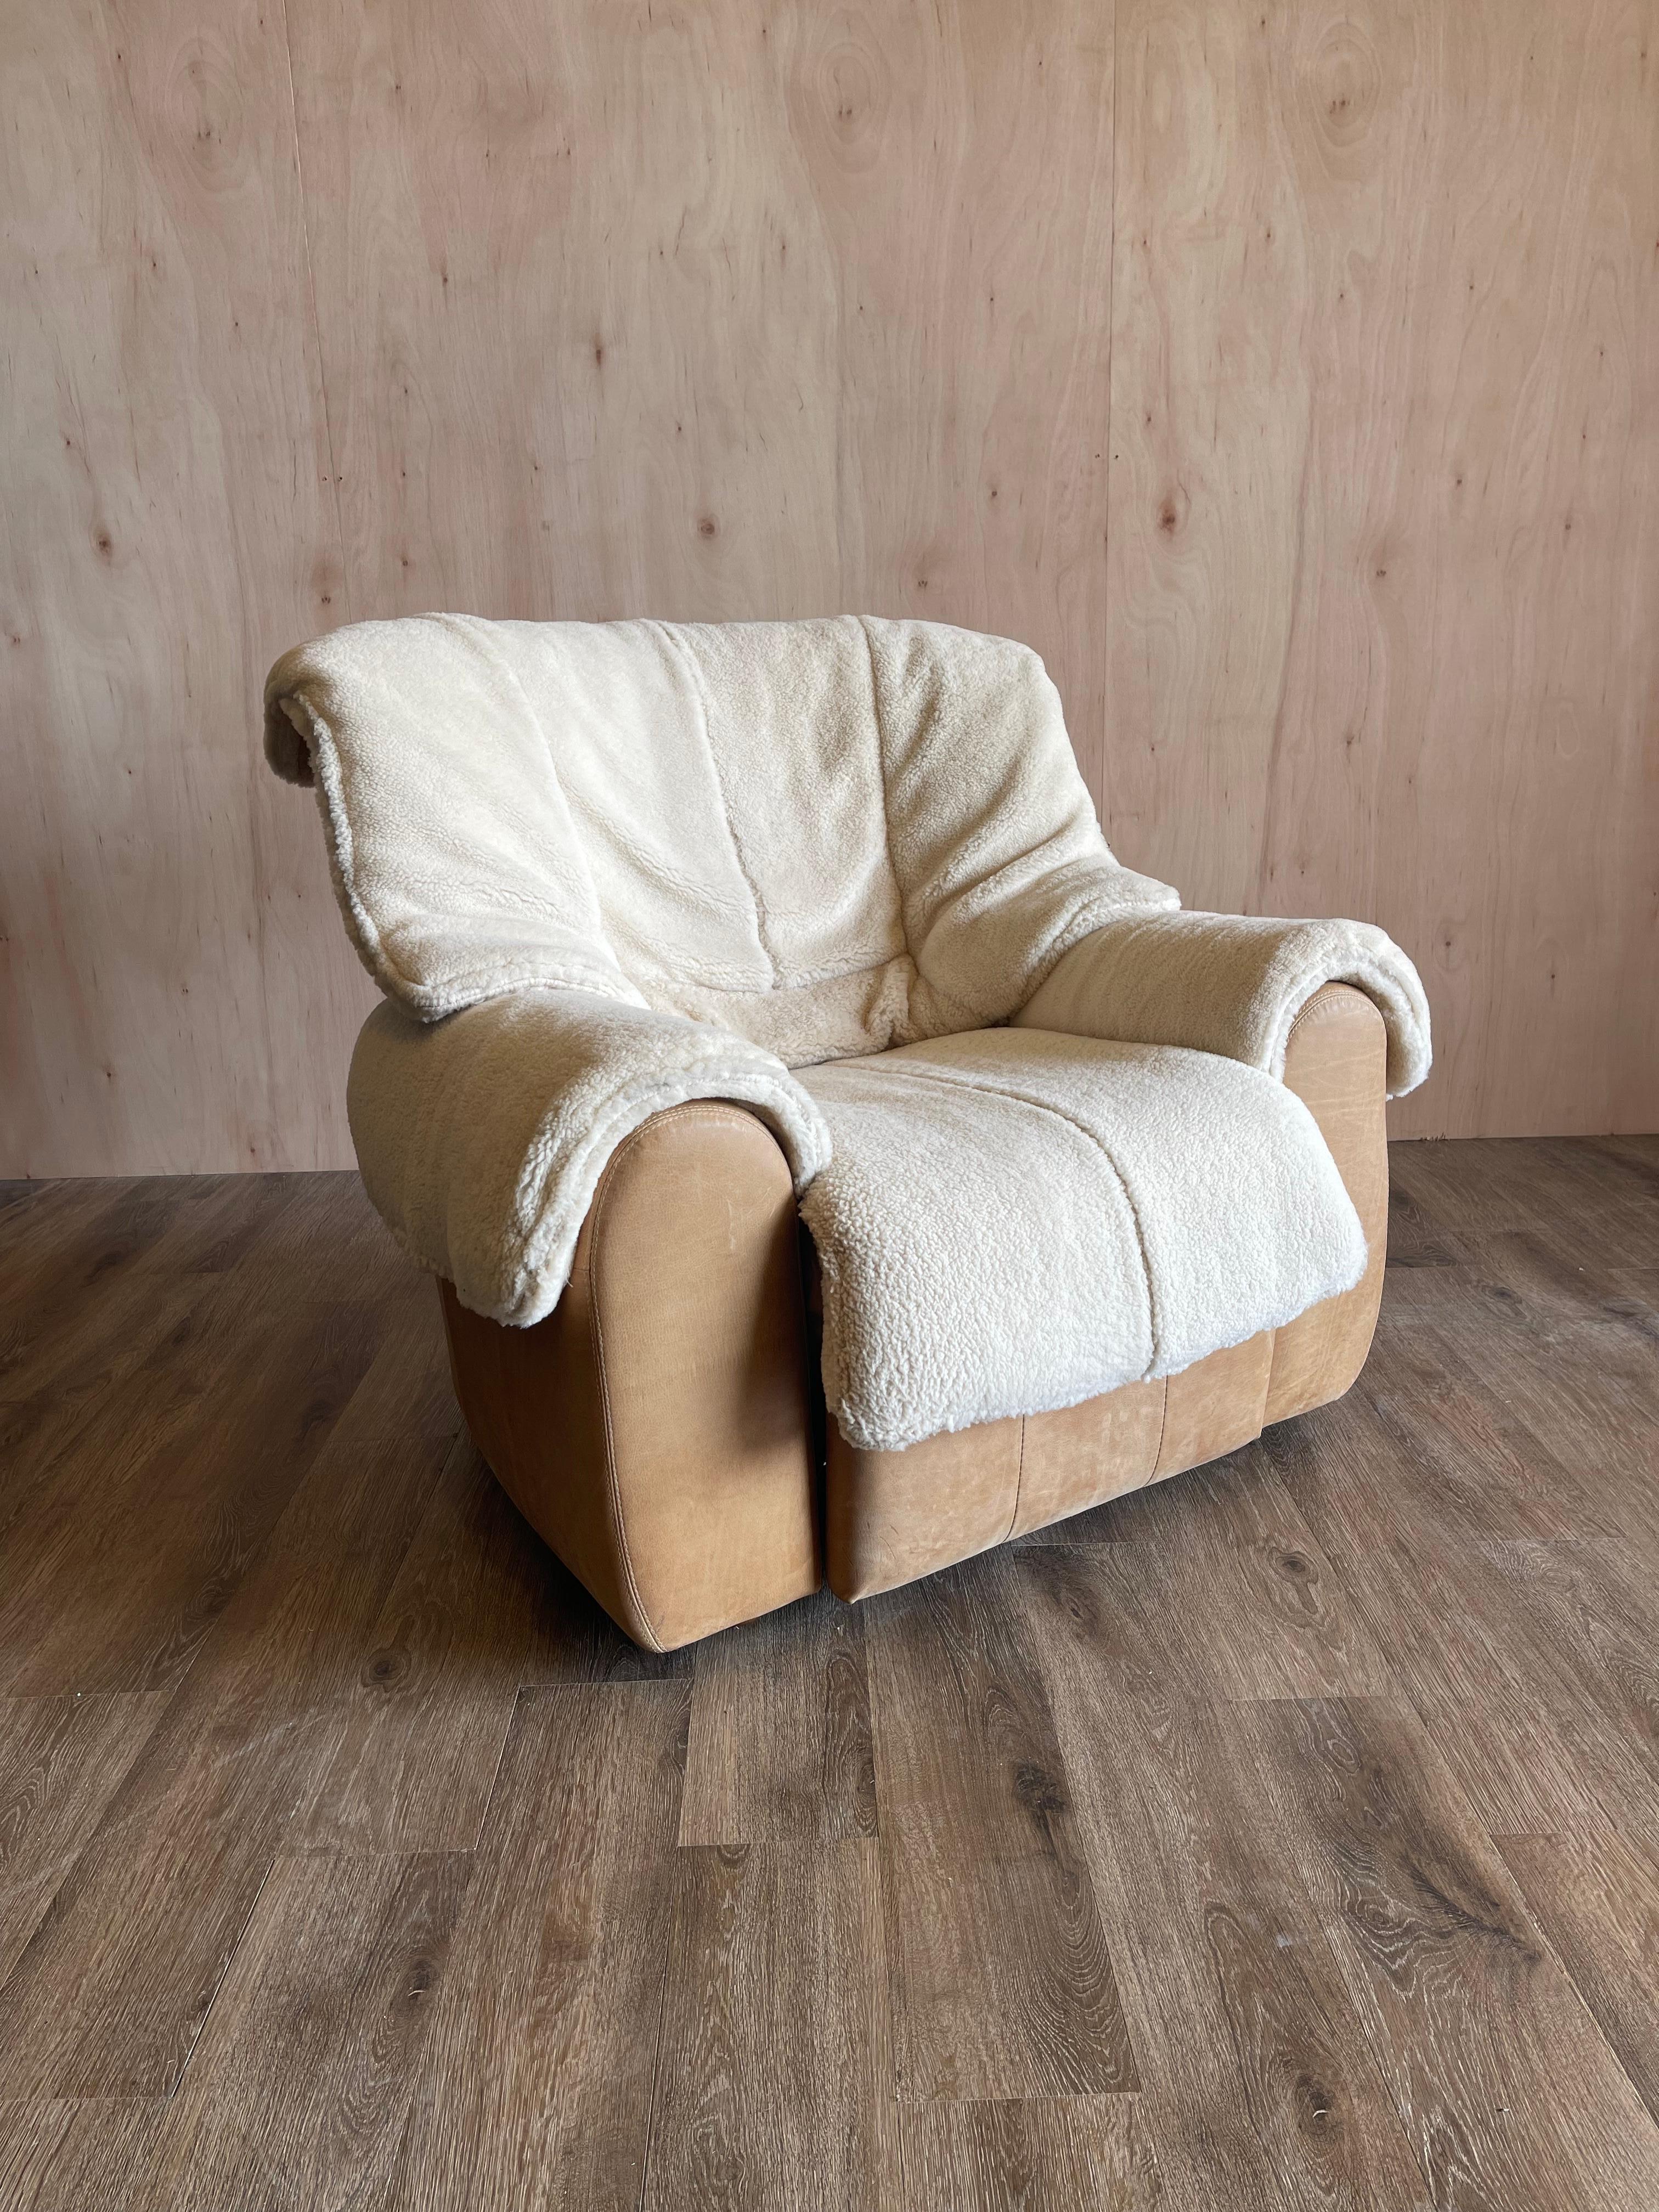 Absolutely the perfect chairs for fireplace sitting, mountain home, Lake House or chalet! Anywhere you need pure cosy comfort, they will fit the bill hands down!
Beautifully reupholstered in natural tone leather and super soft European shearling.